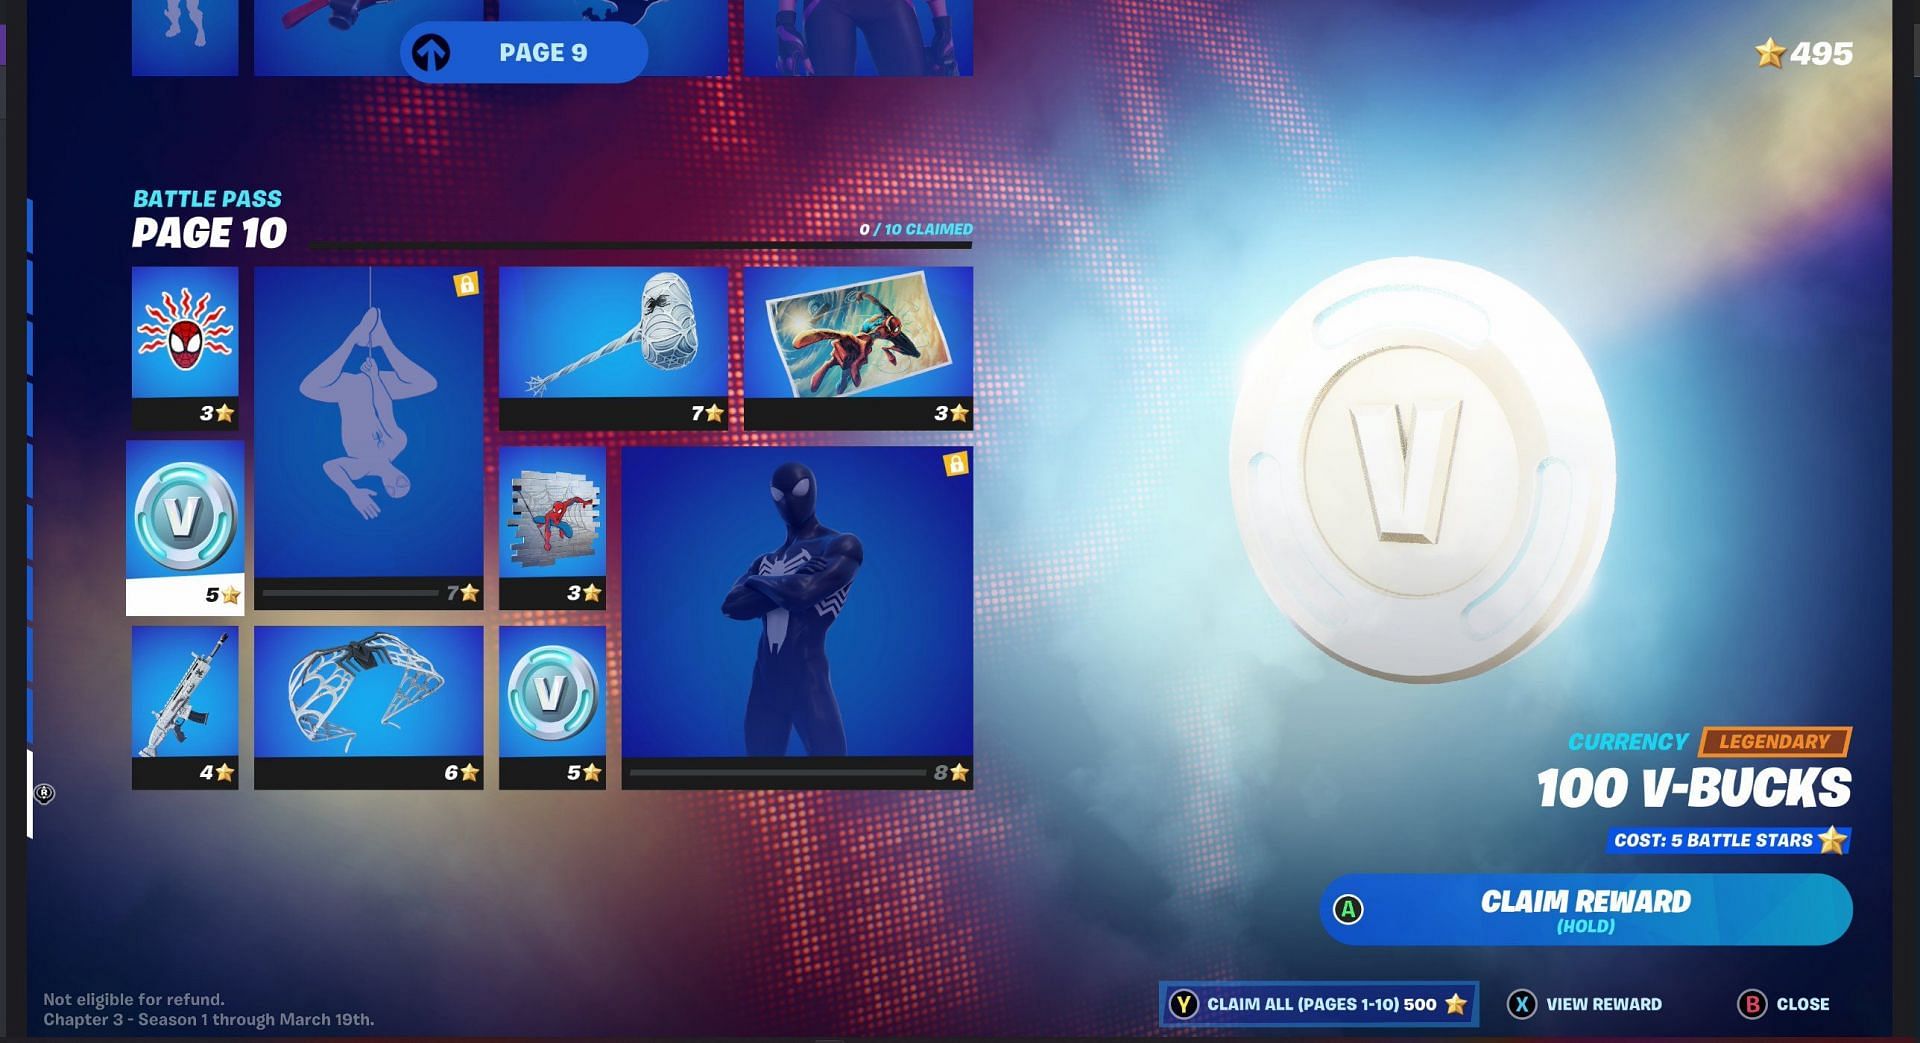 Page 10 of Battle Pass (Image via Fortnite)